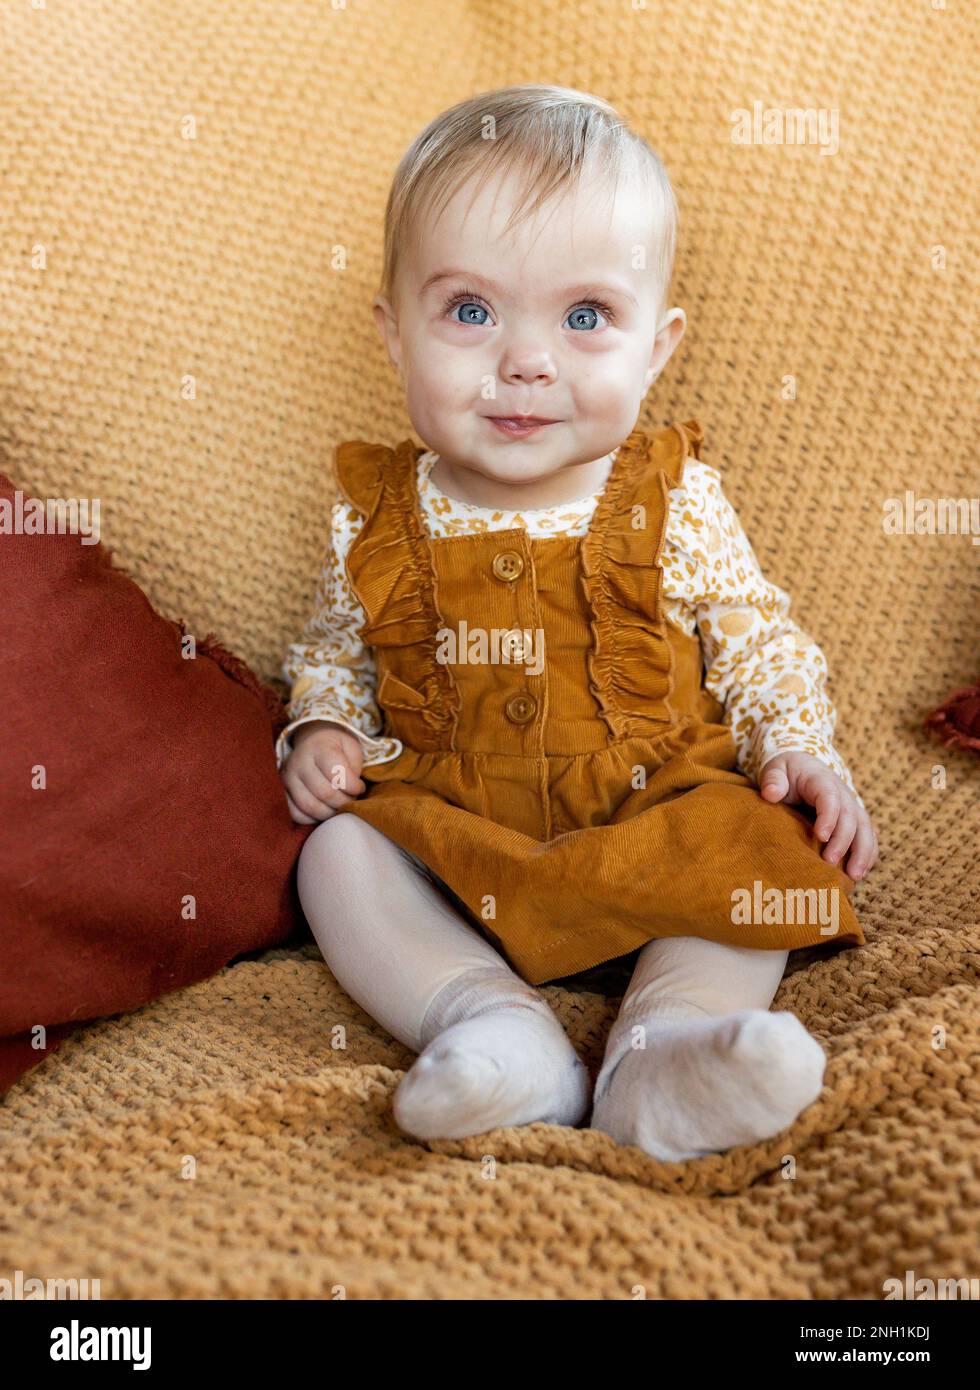 Happy baby smiling in dress Stock Photo